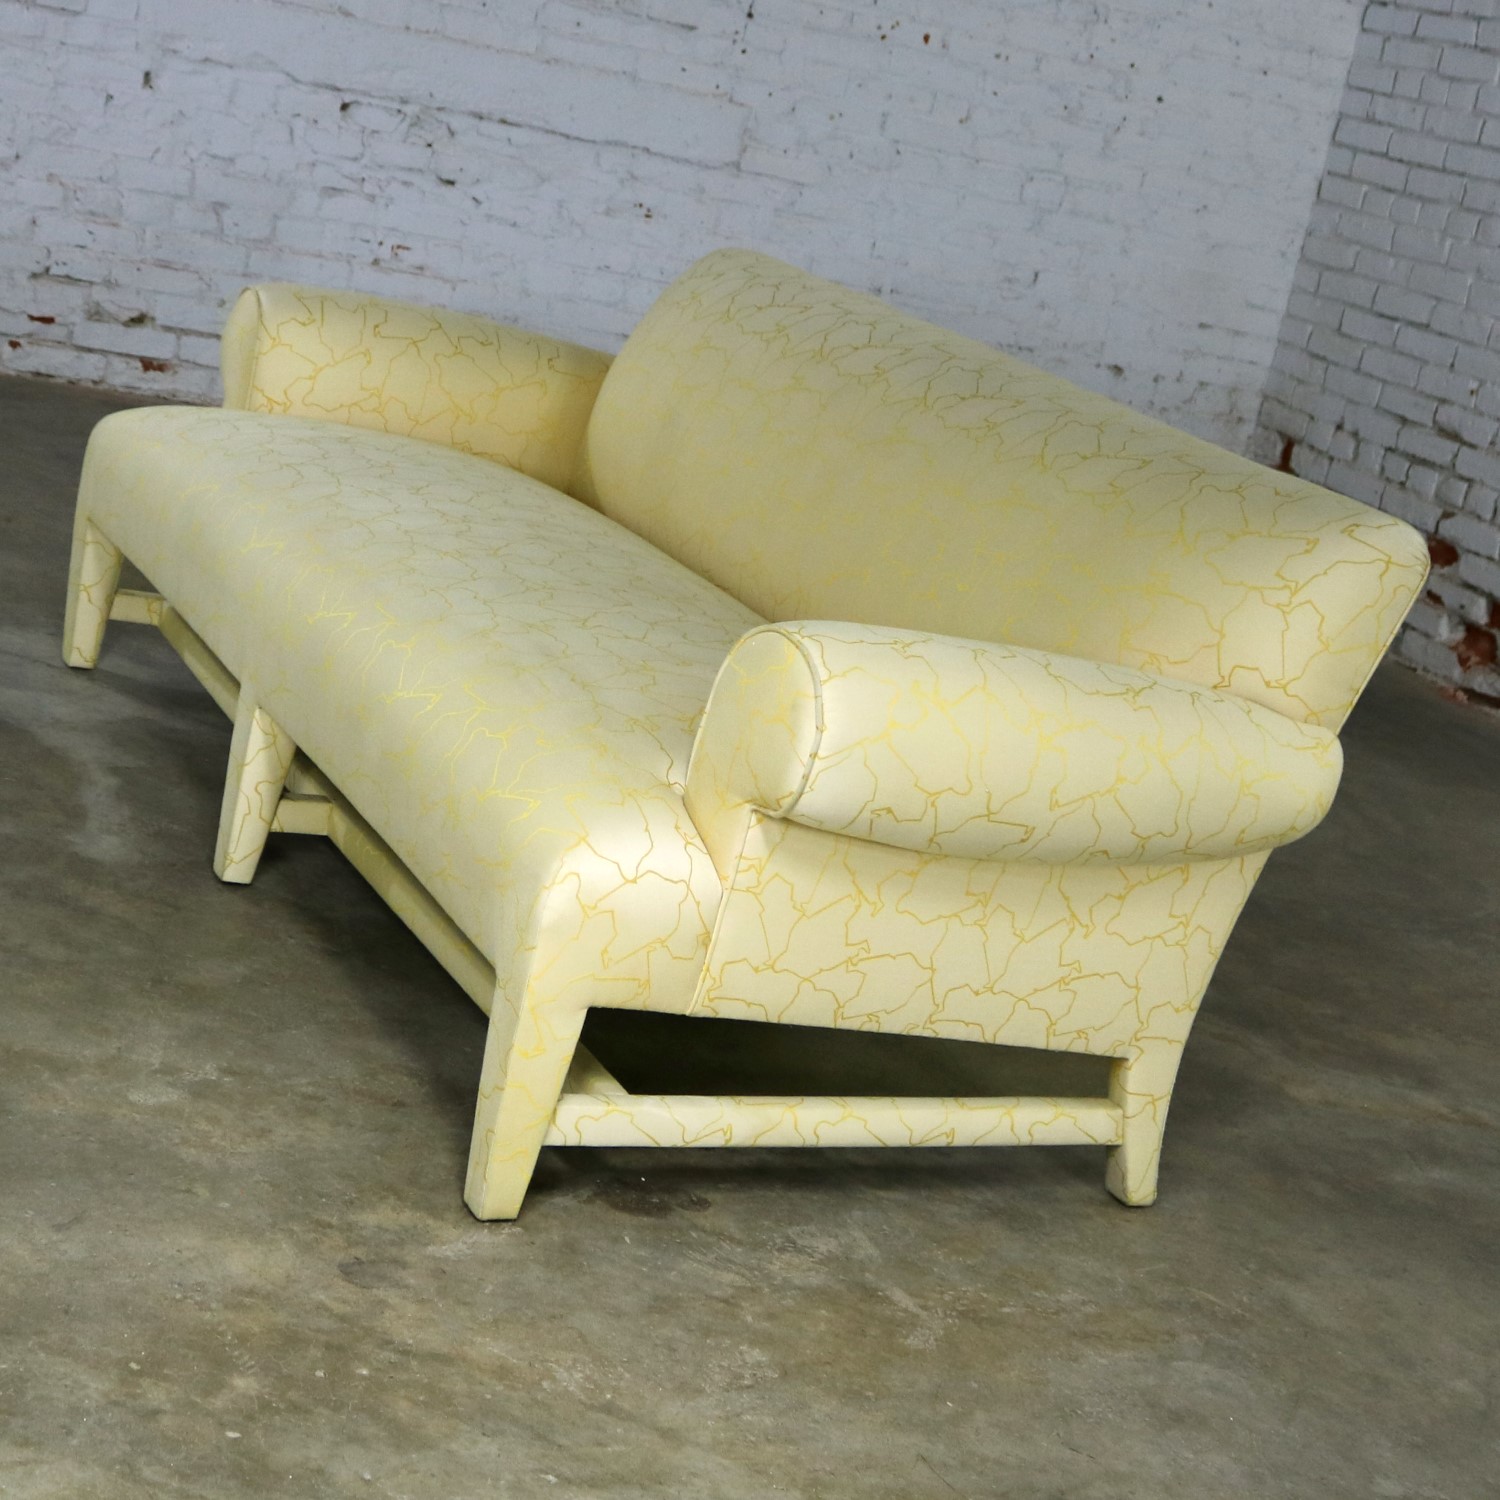 Donghia Love Seat Sofa in Cream and Yellow Fat Man Fabric Attributed to Angelo Donghia